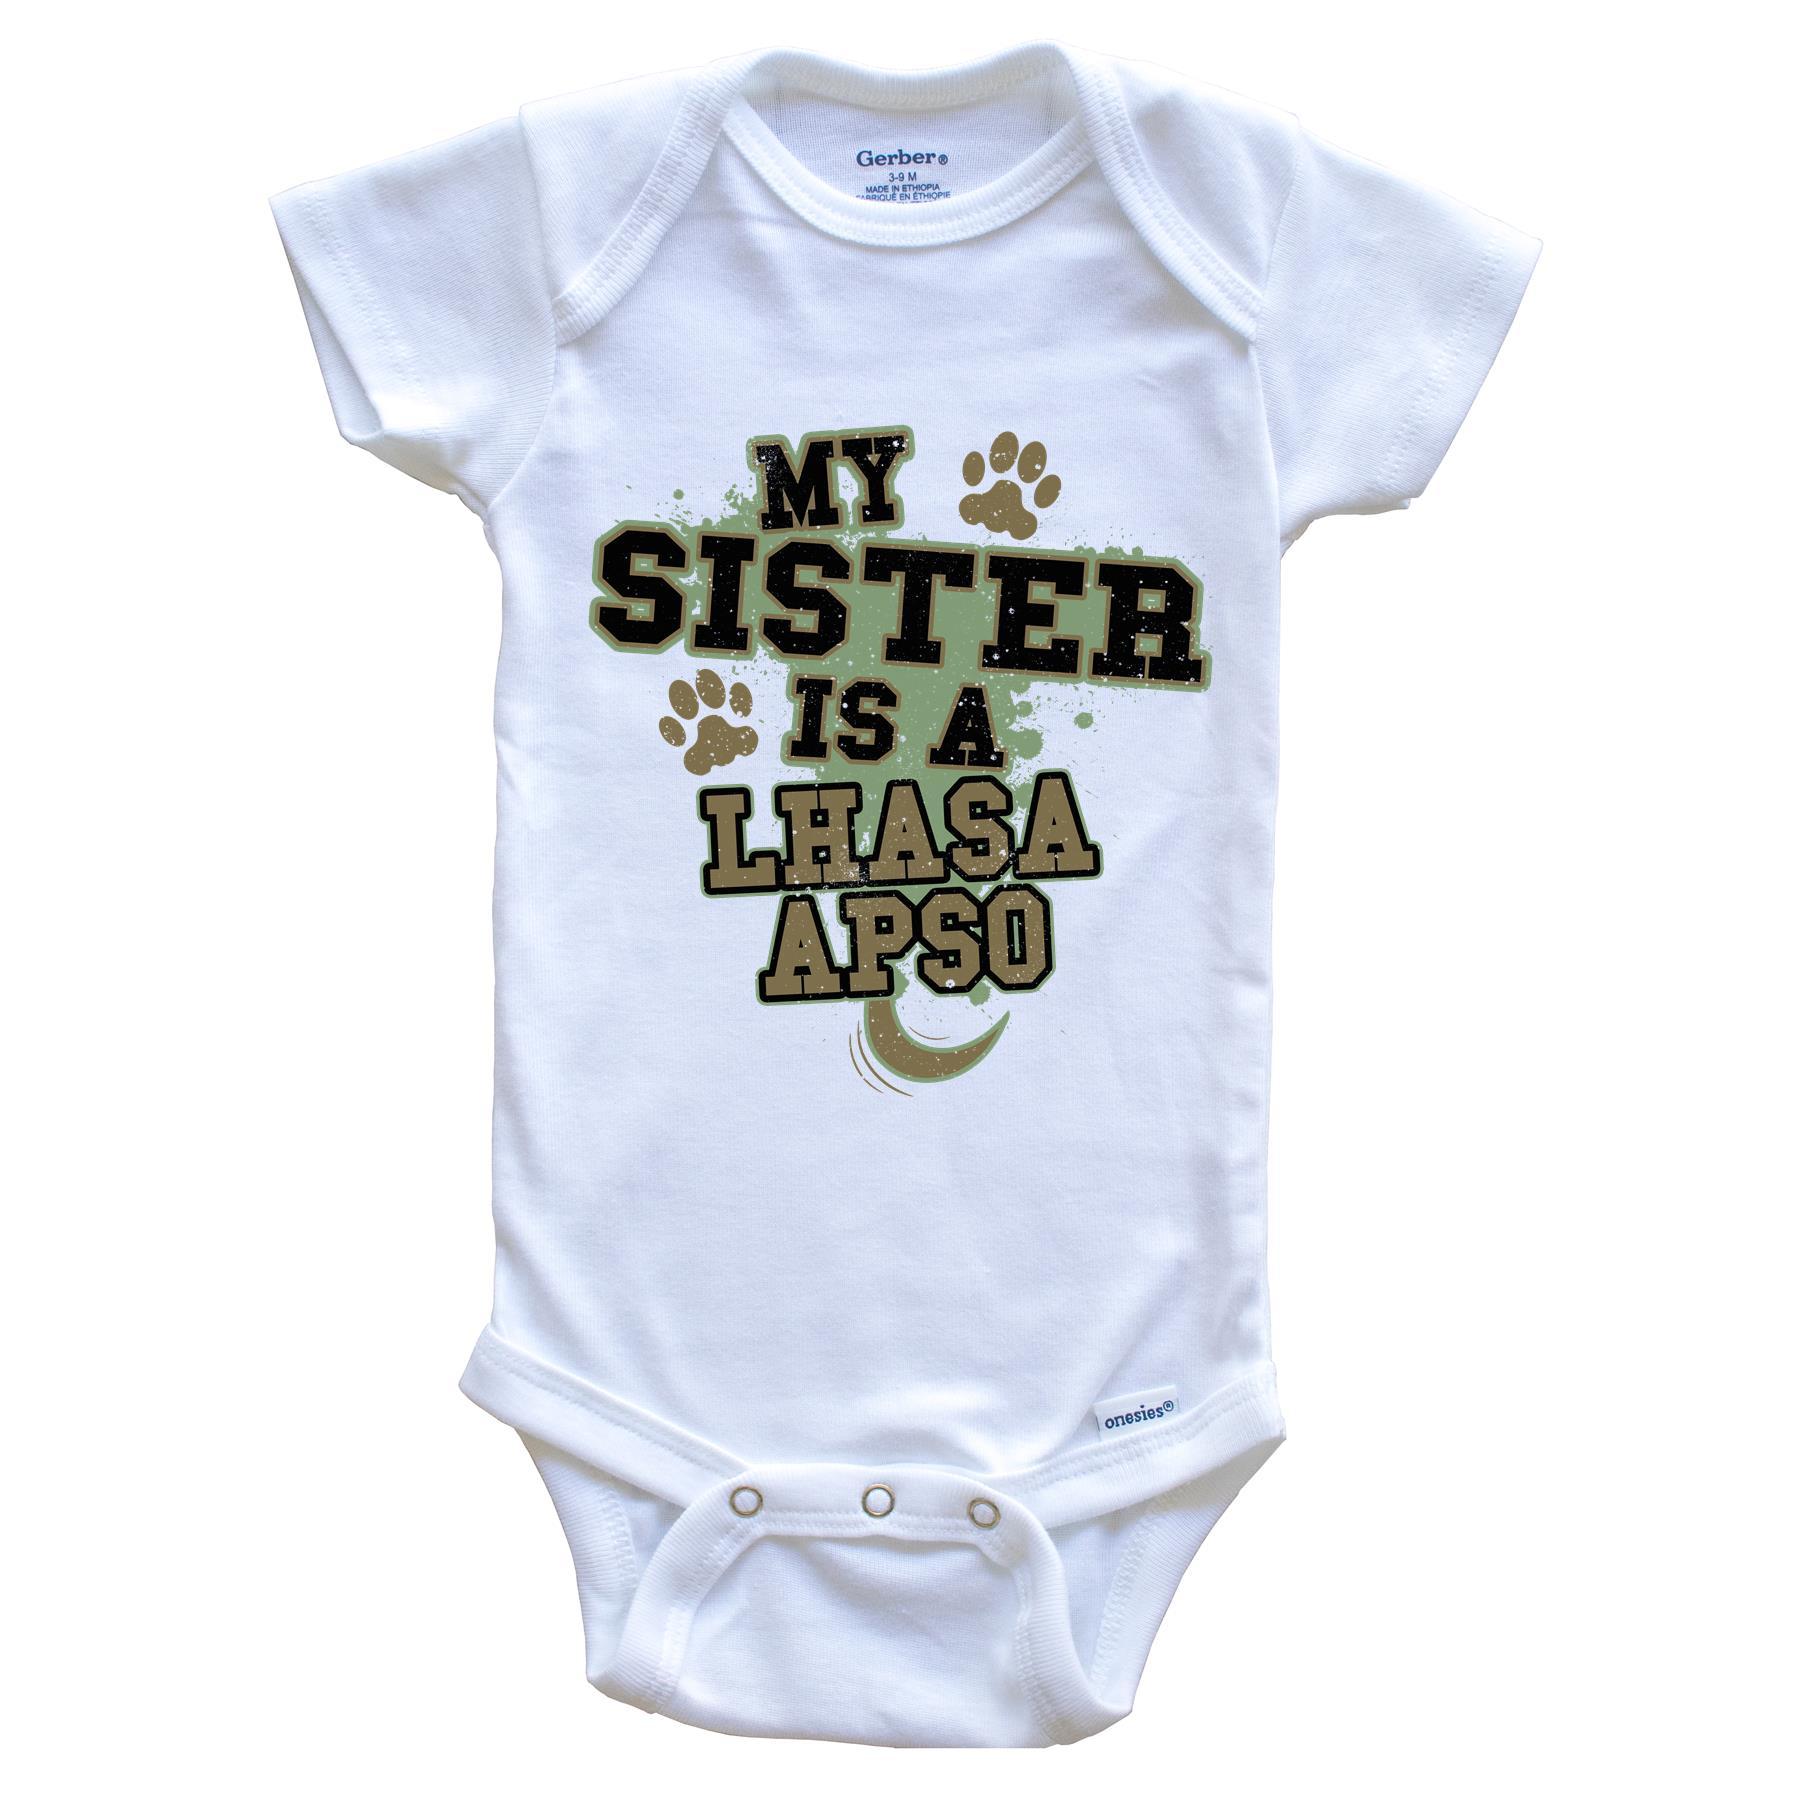 My Sister Is A Lhasa Apso Funny Dog Baby Onesie